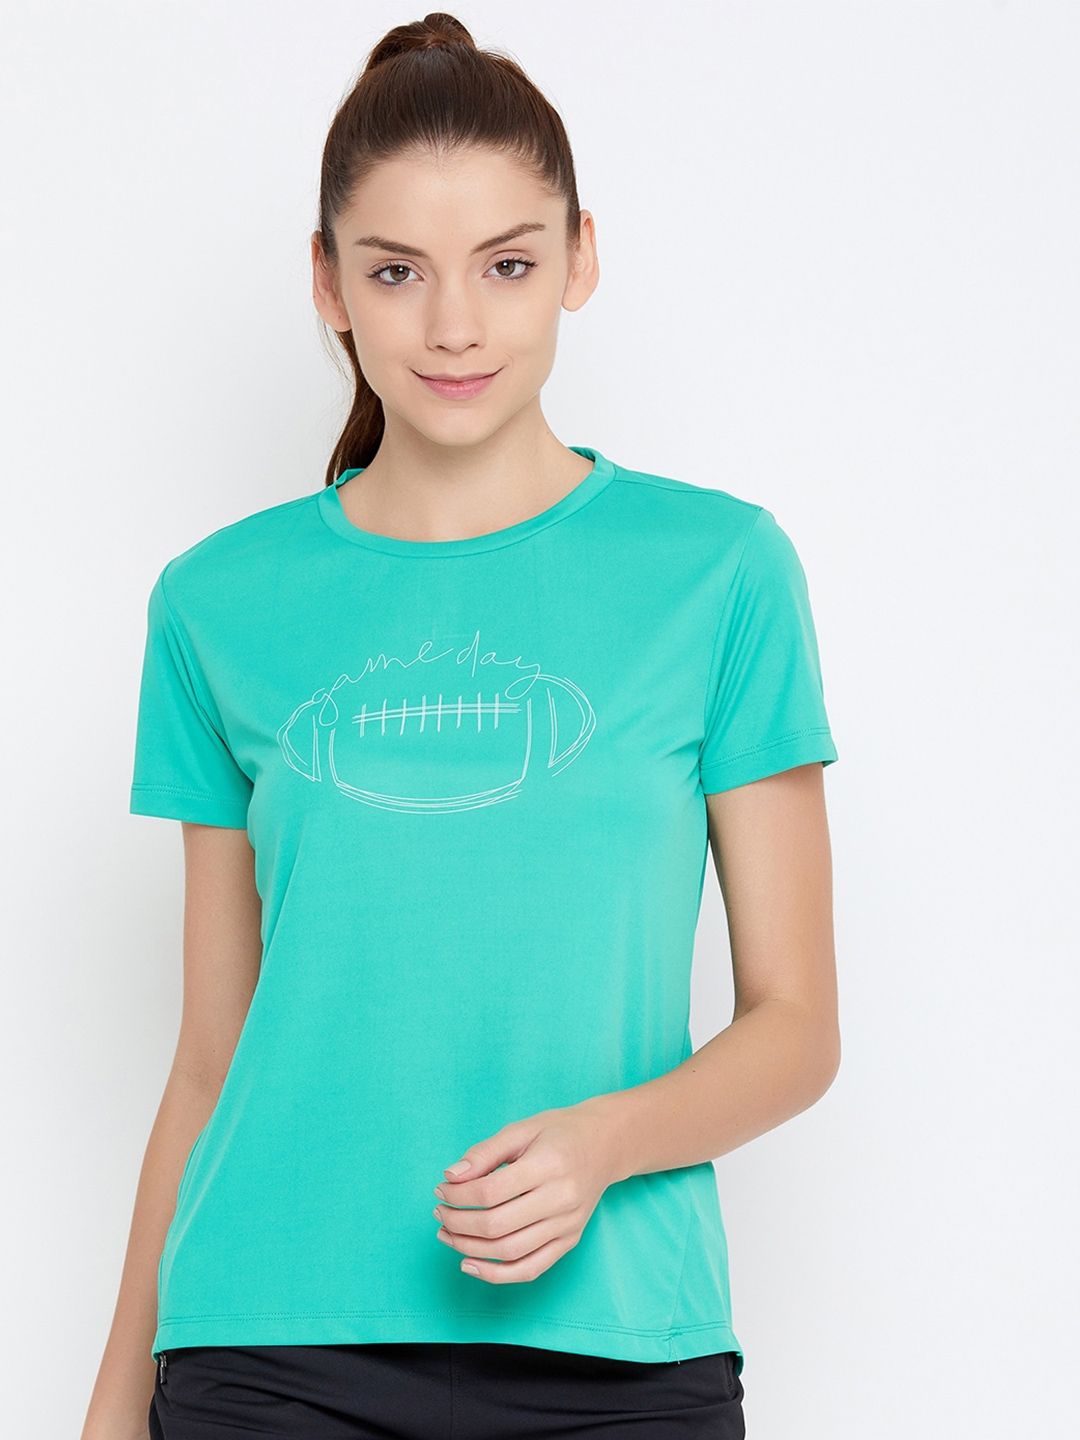 URKNIT Typography Printed Cool Max Pure Cotton Sports T-shirt Price in India